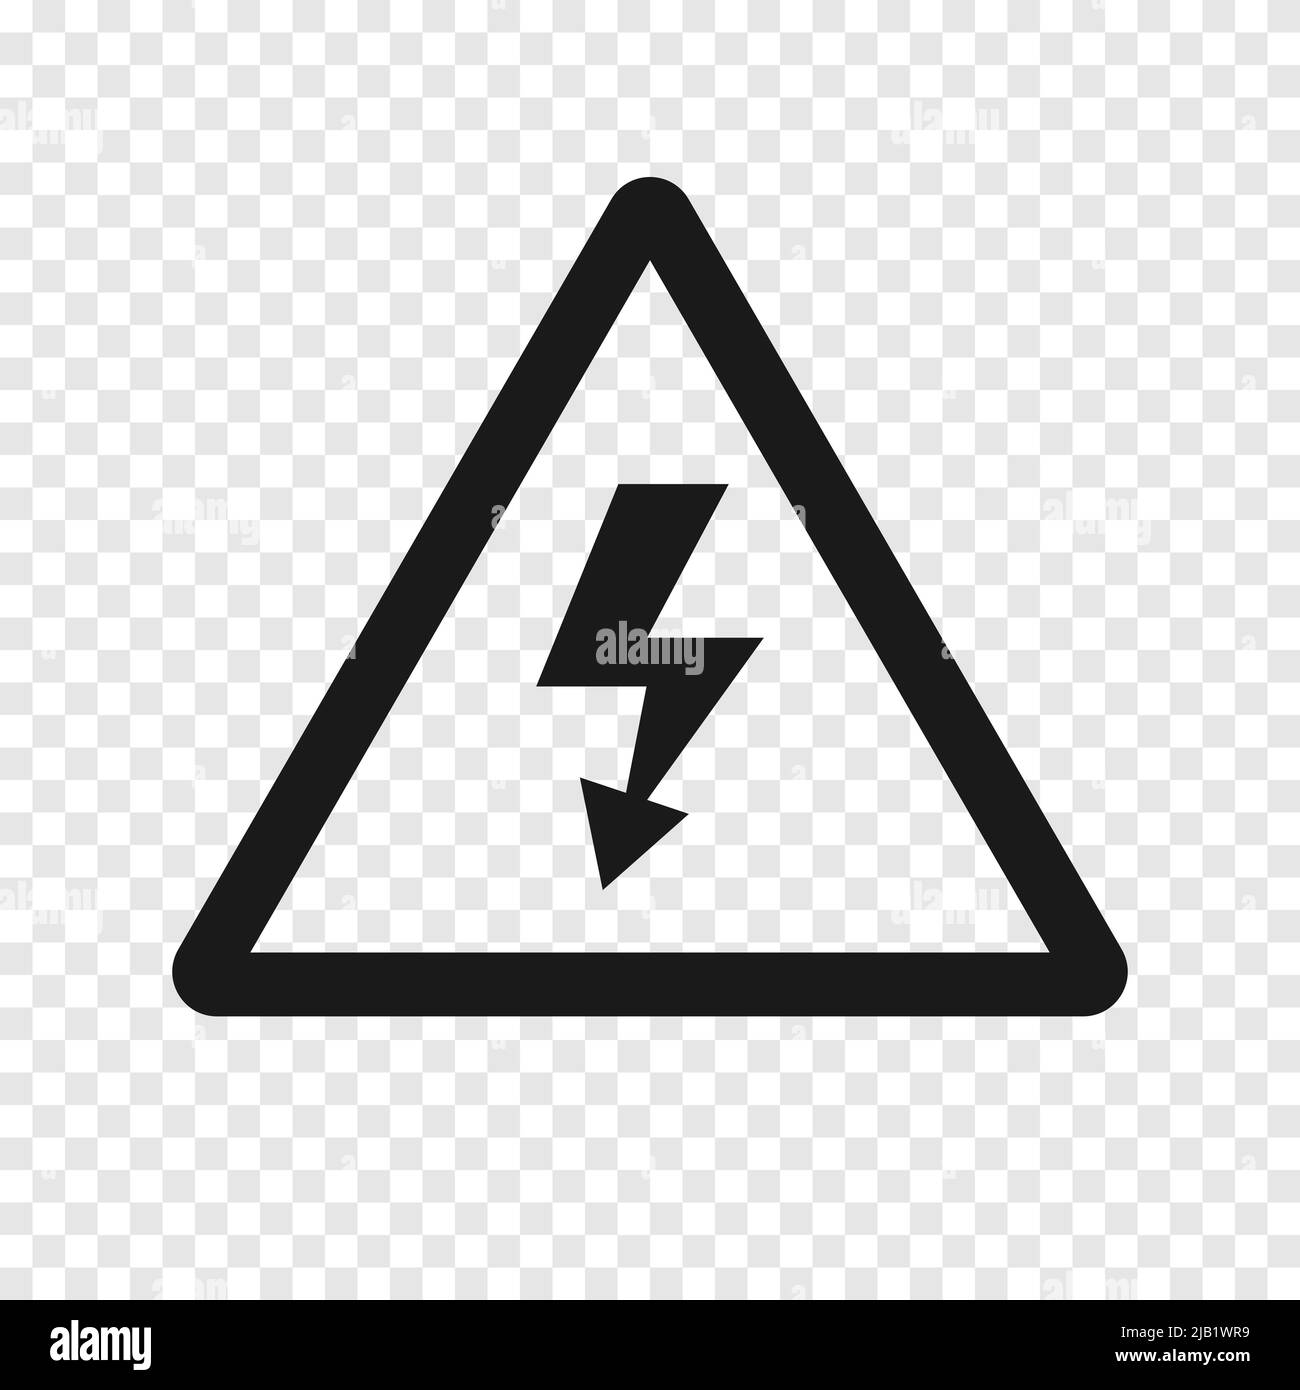 Warning danger sign icon simple design Stock Vector